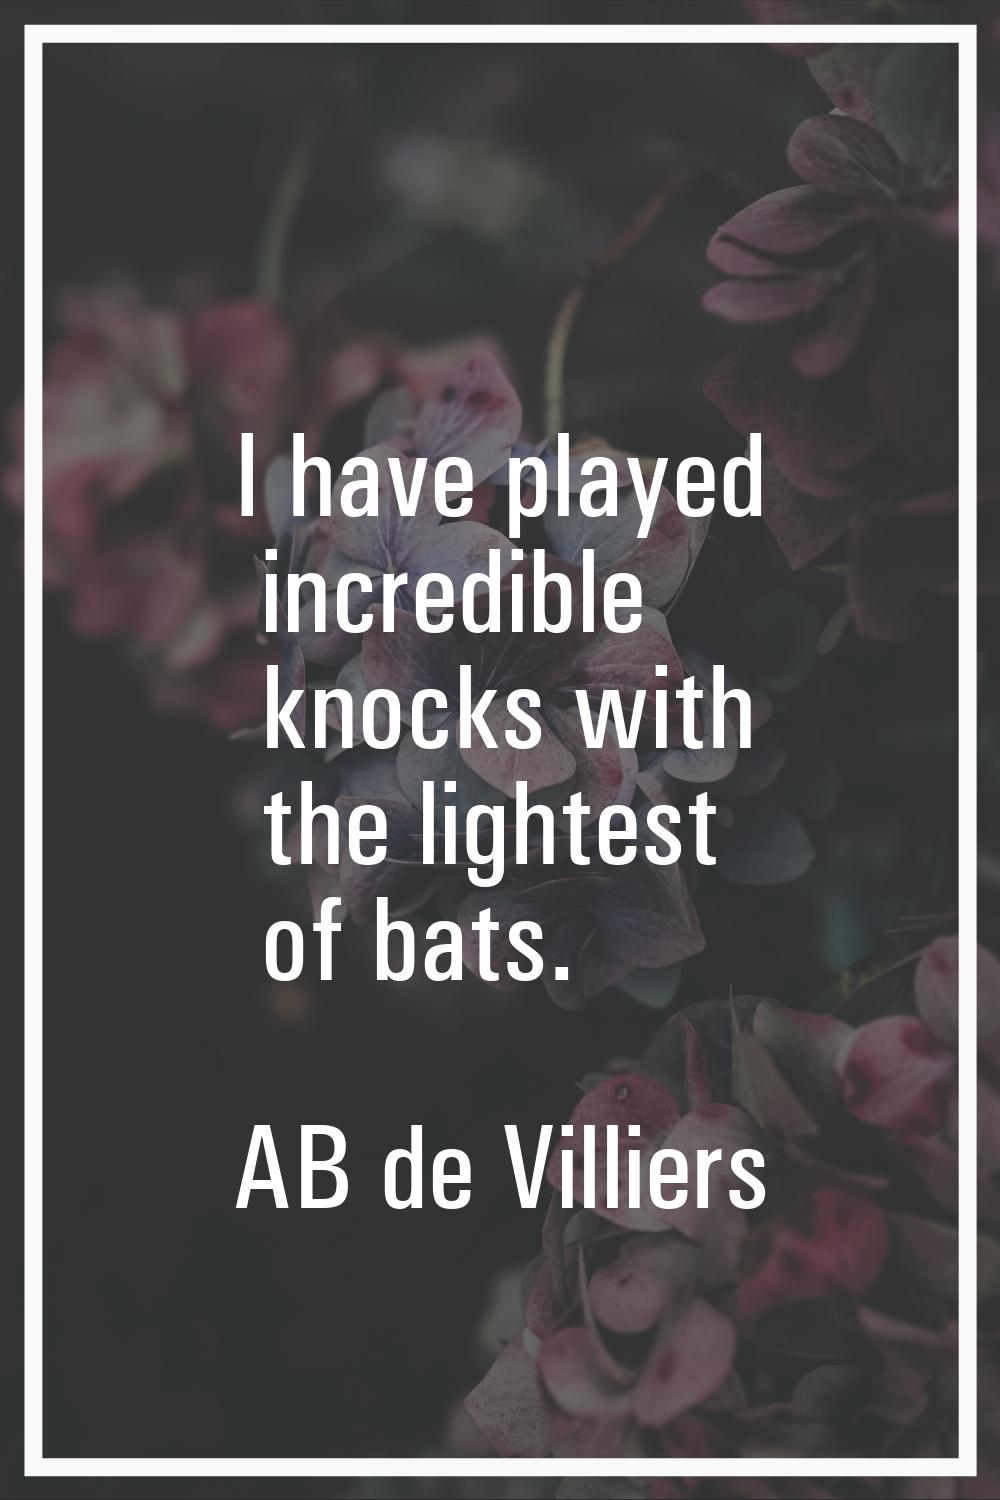 I have played incredible knocks with the lightest of bats.